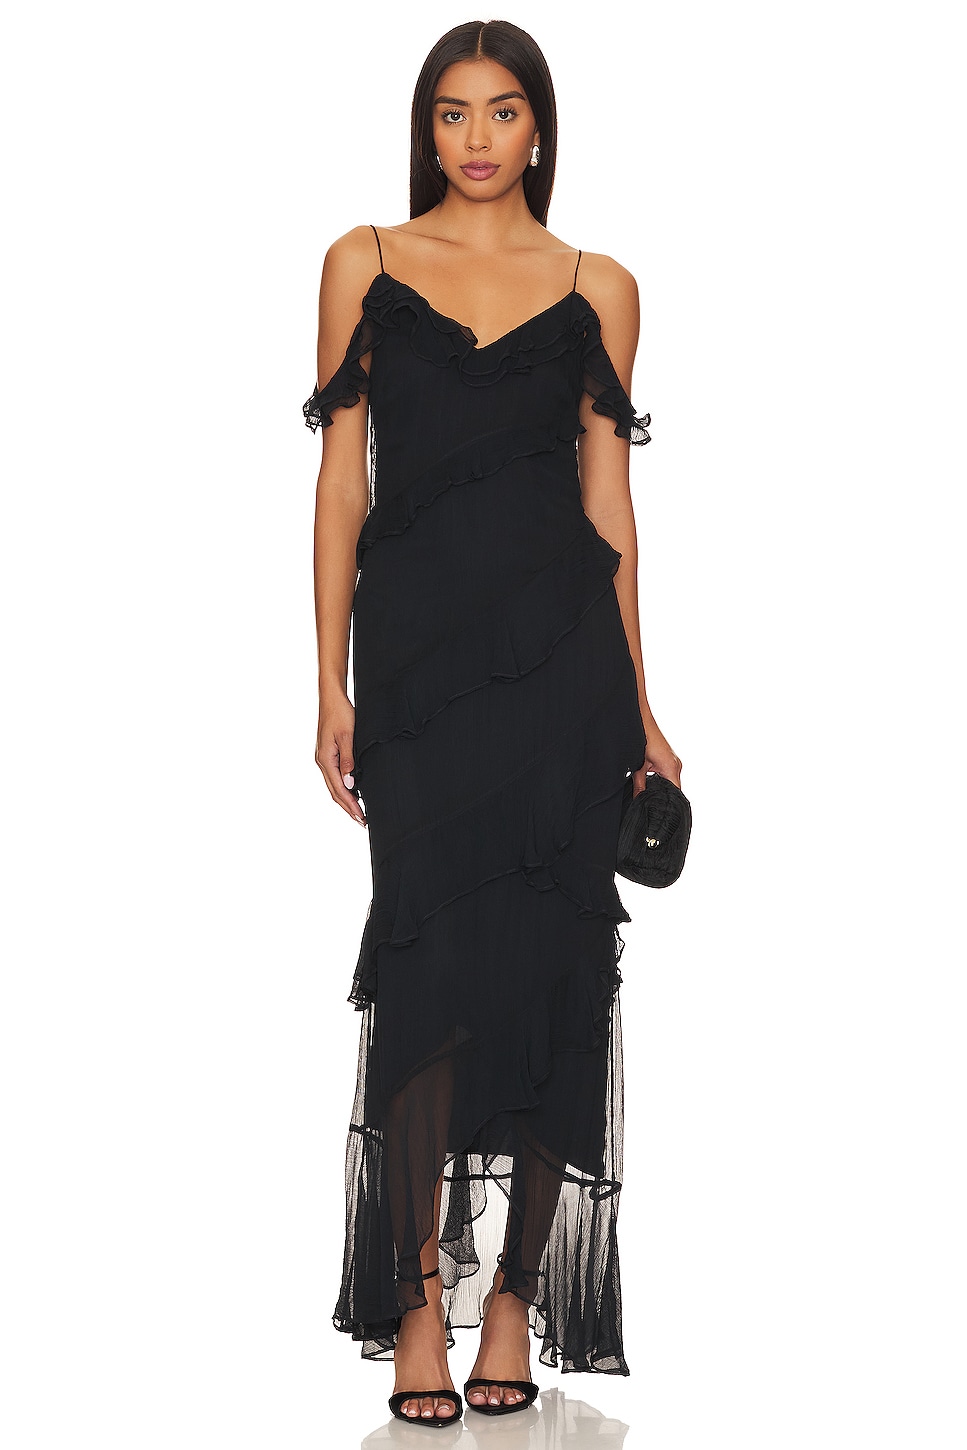 House of Harlow 1960 x REVOLVE Maxime Maxi Dress in Black